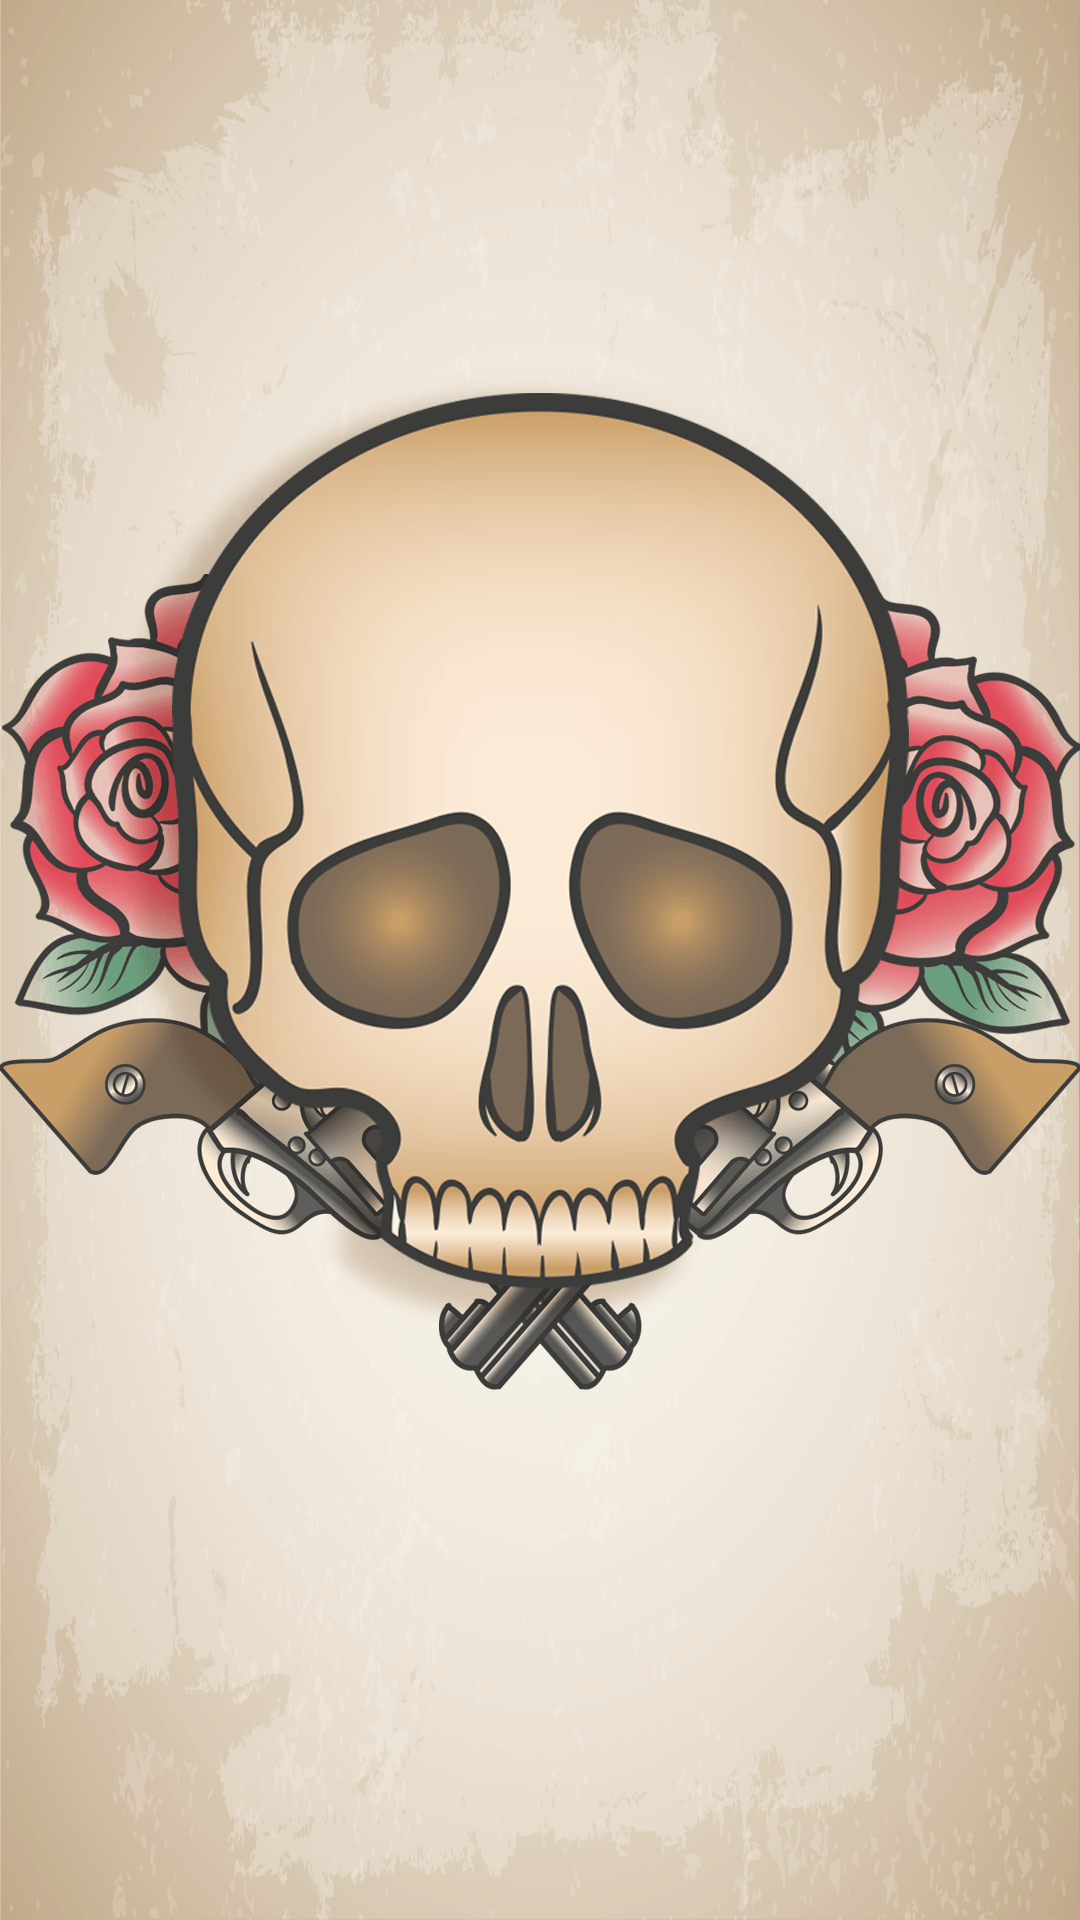 Free HD Skulls And Roses iPhone Wallpaper For Download .0252